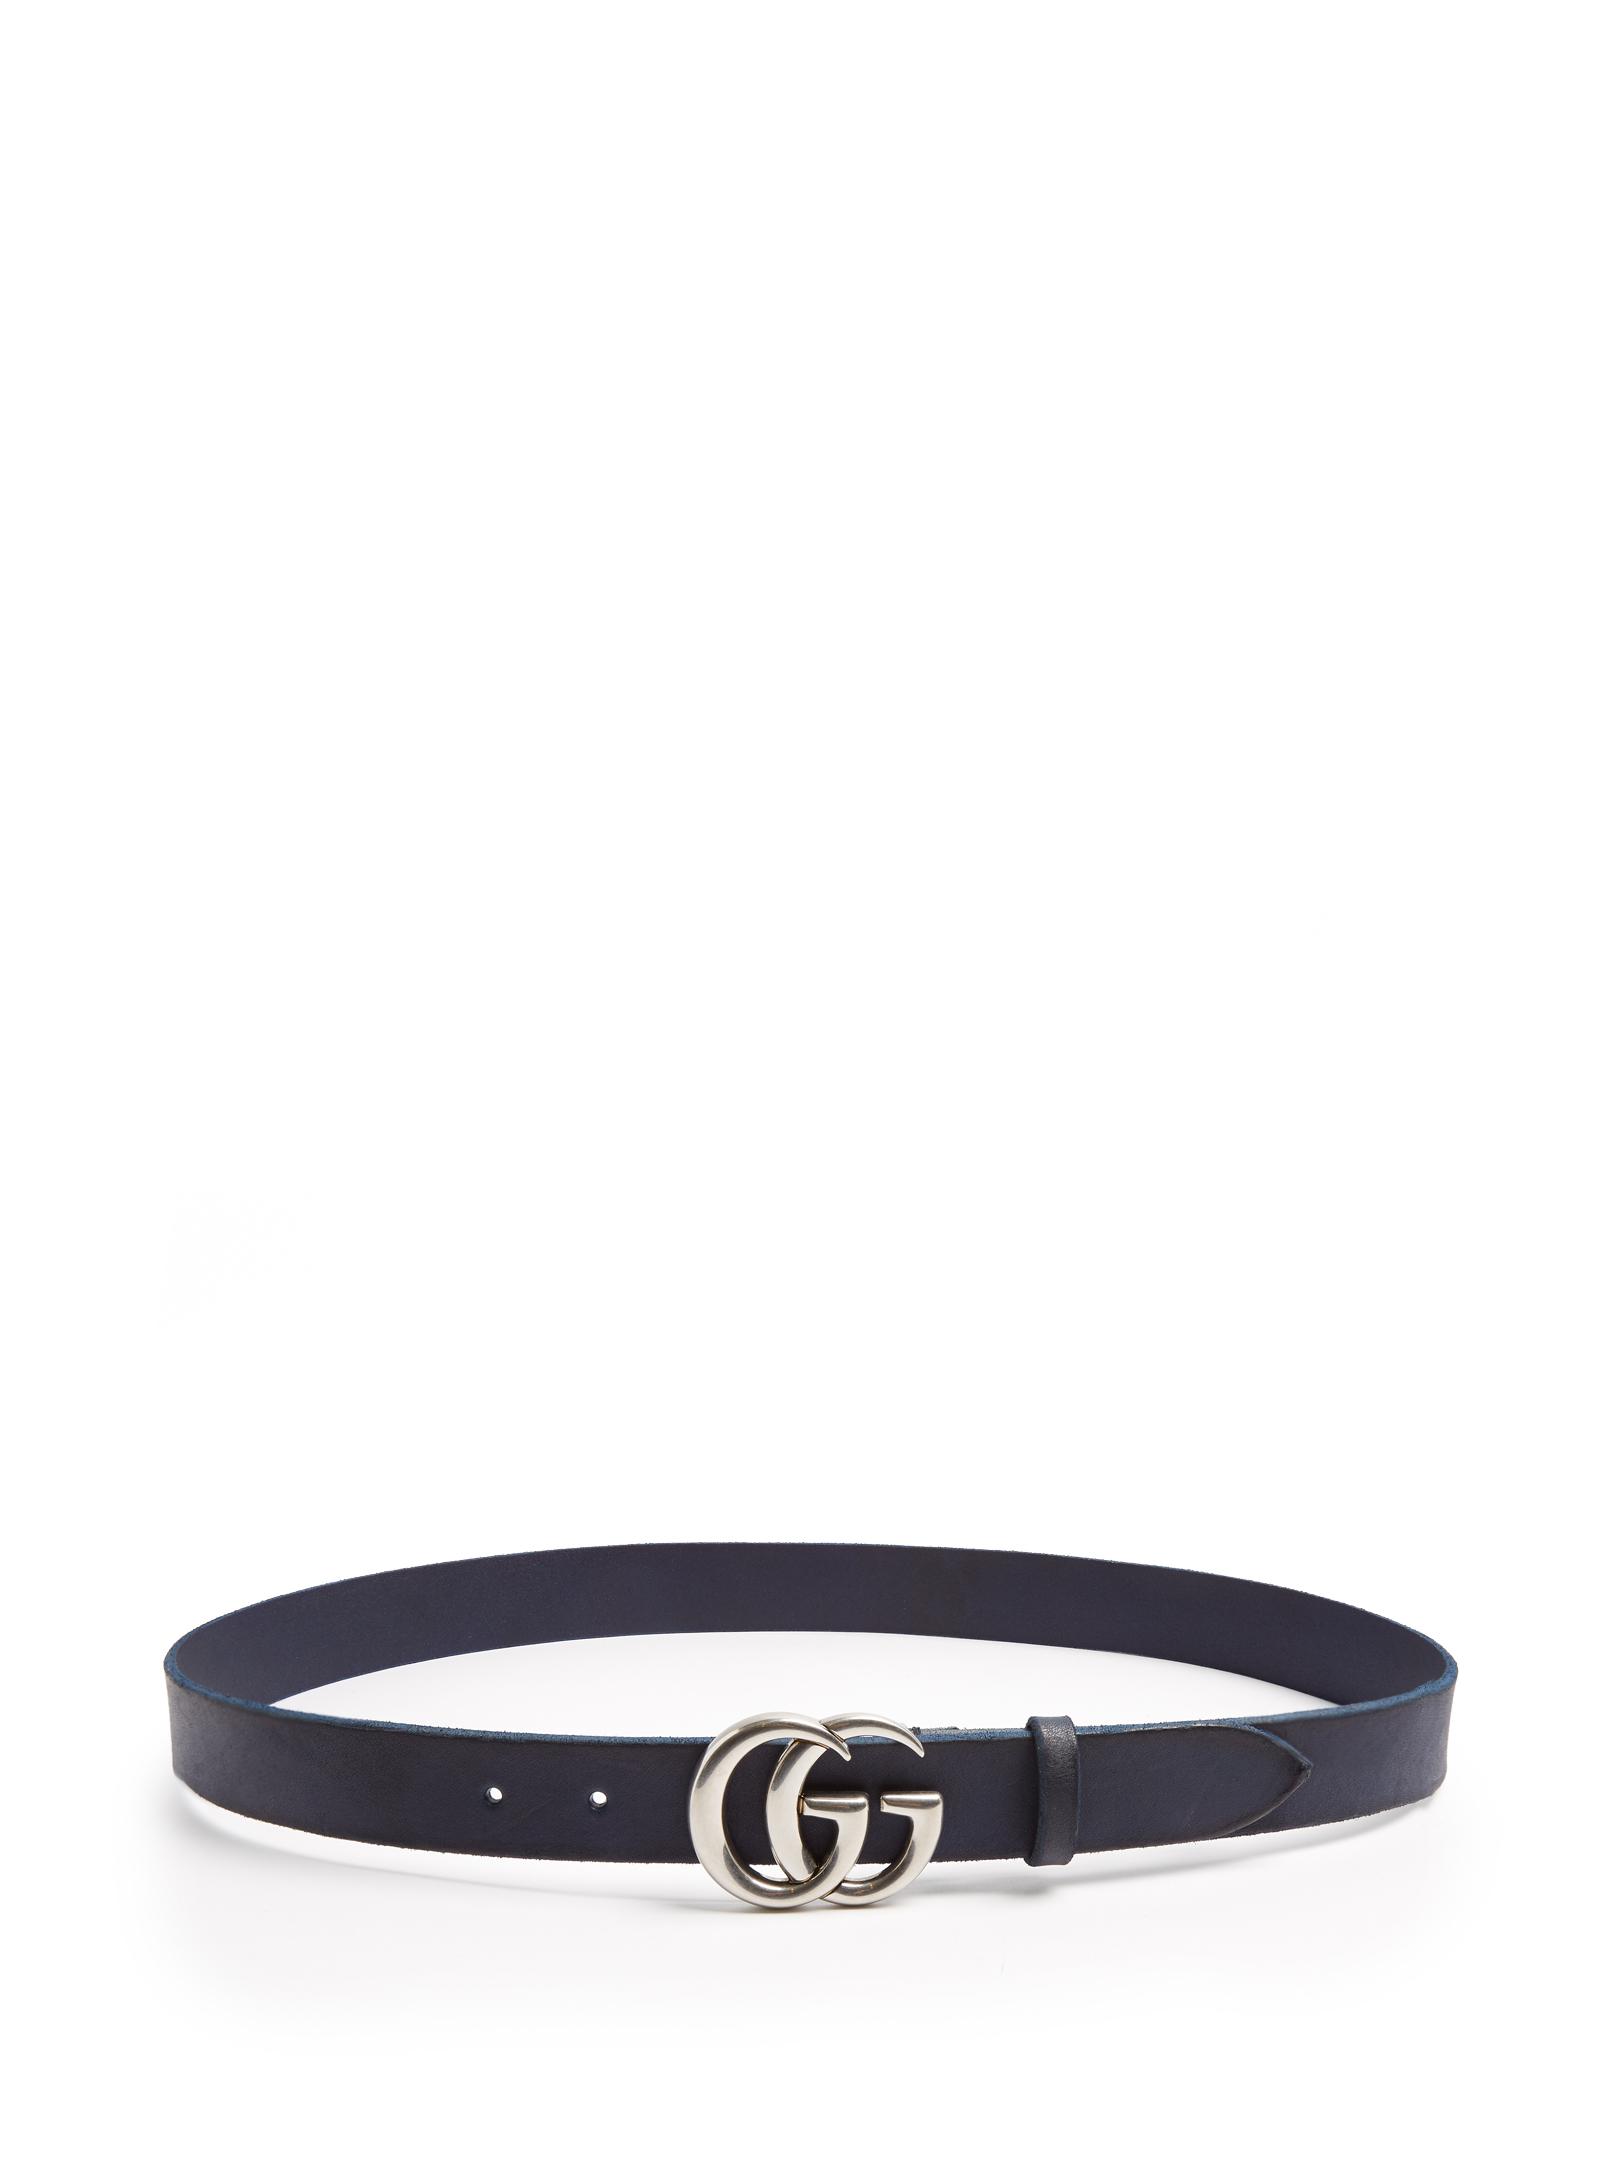 Lyst - Gucci Gg Marmont Leather Belt in Blue for Men